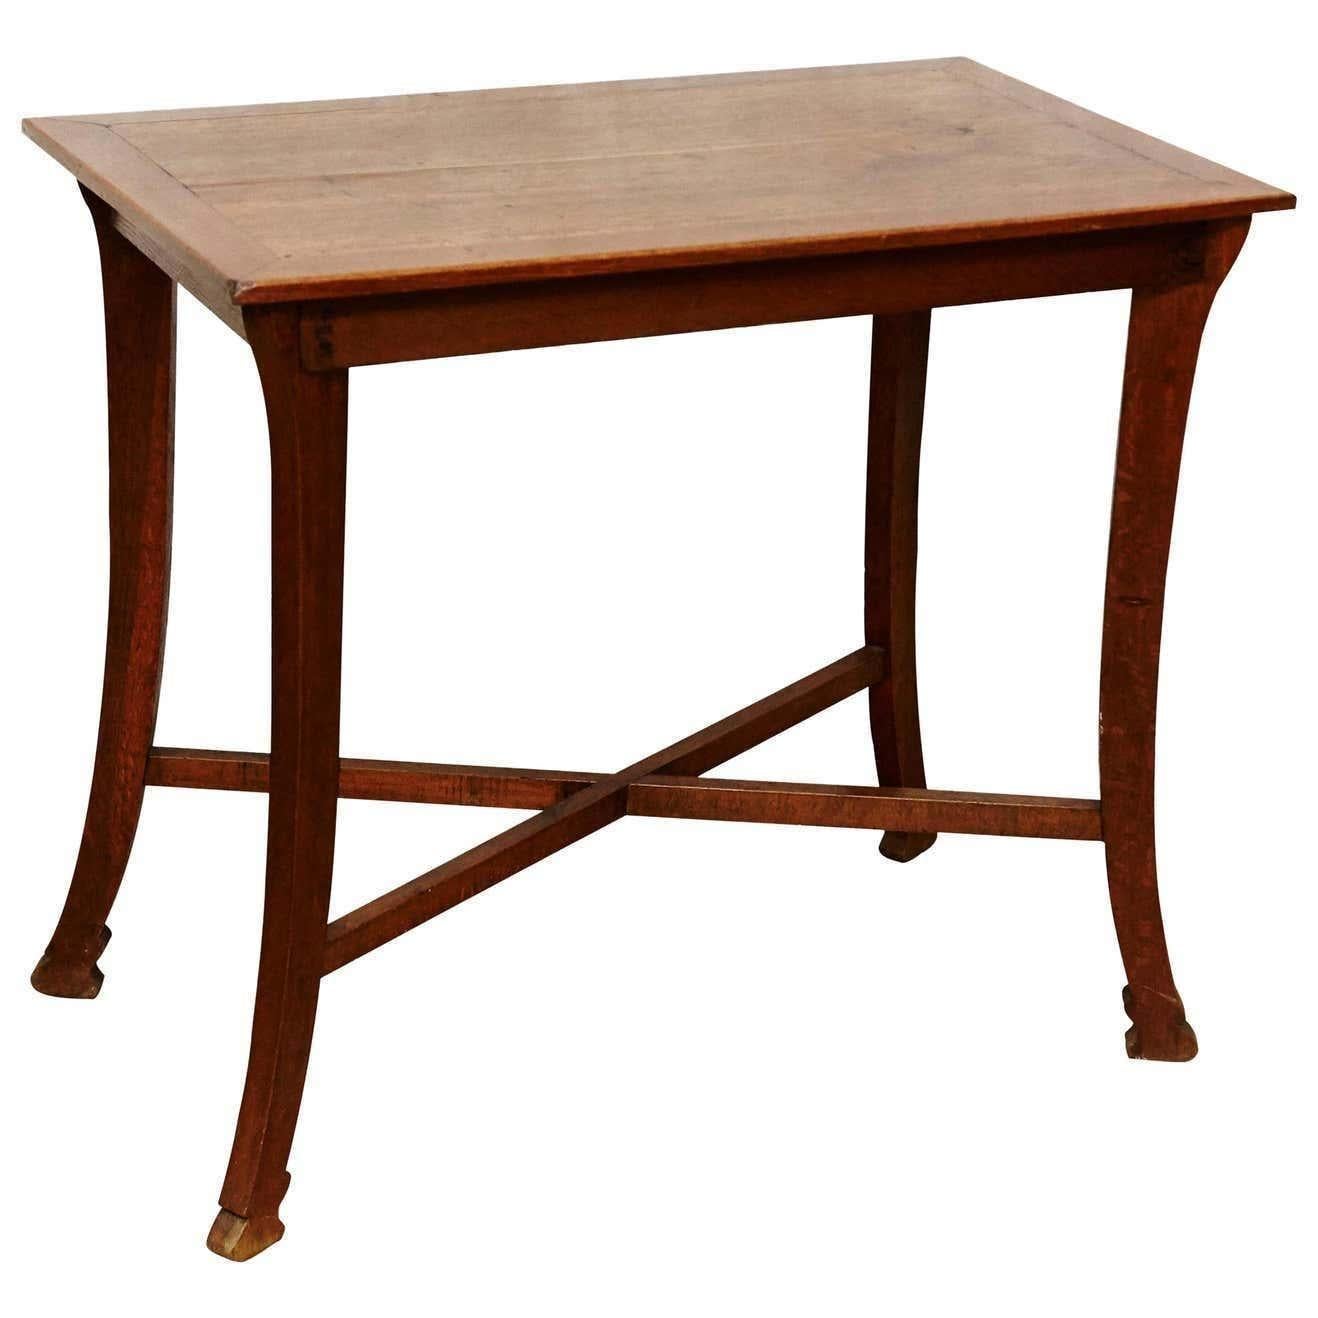 Table designed and manufactured by Thonet, circa 1930.
Manufactured in Germany.

In original condition, with minor wear consistent of age and use, preserving a beautiful patina, it has some restaurations.

Measures: H 79cm x W 89cm x D 53cm.